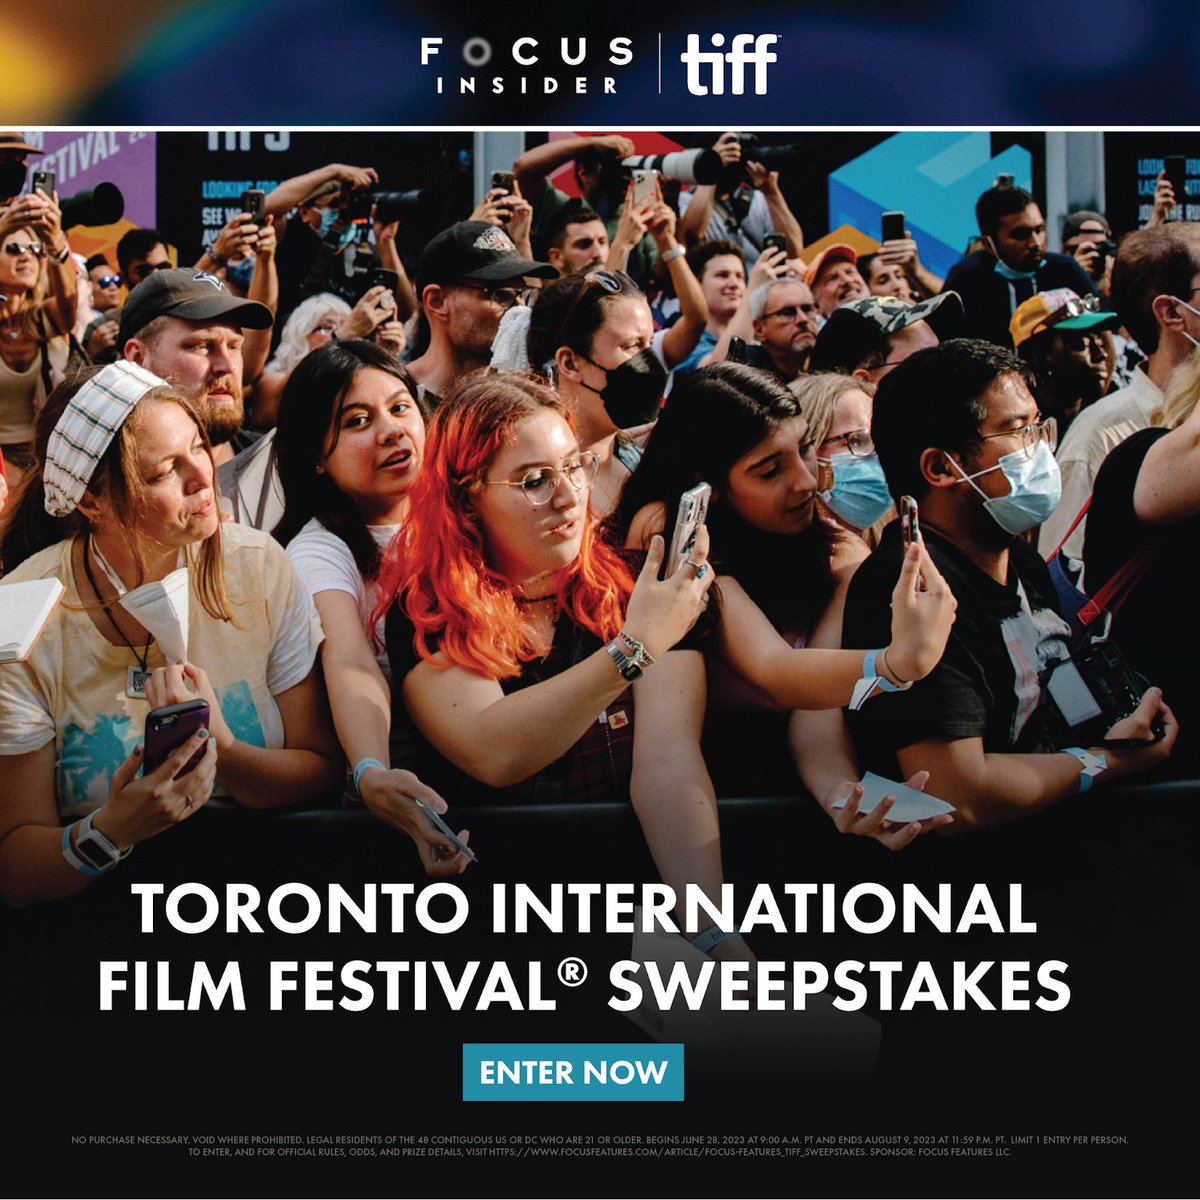 From red carpet glam to Roy Thomson Hall—don’t miss your chance to attend one of the biggest film festivals in the world.

Enter before August 9, 2023 at 11:59pm PT to win: bit.ly/TIFFSweeps-TW